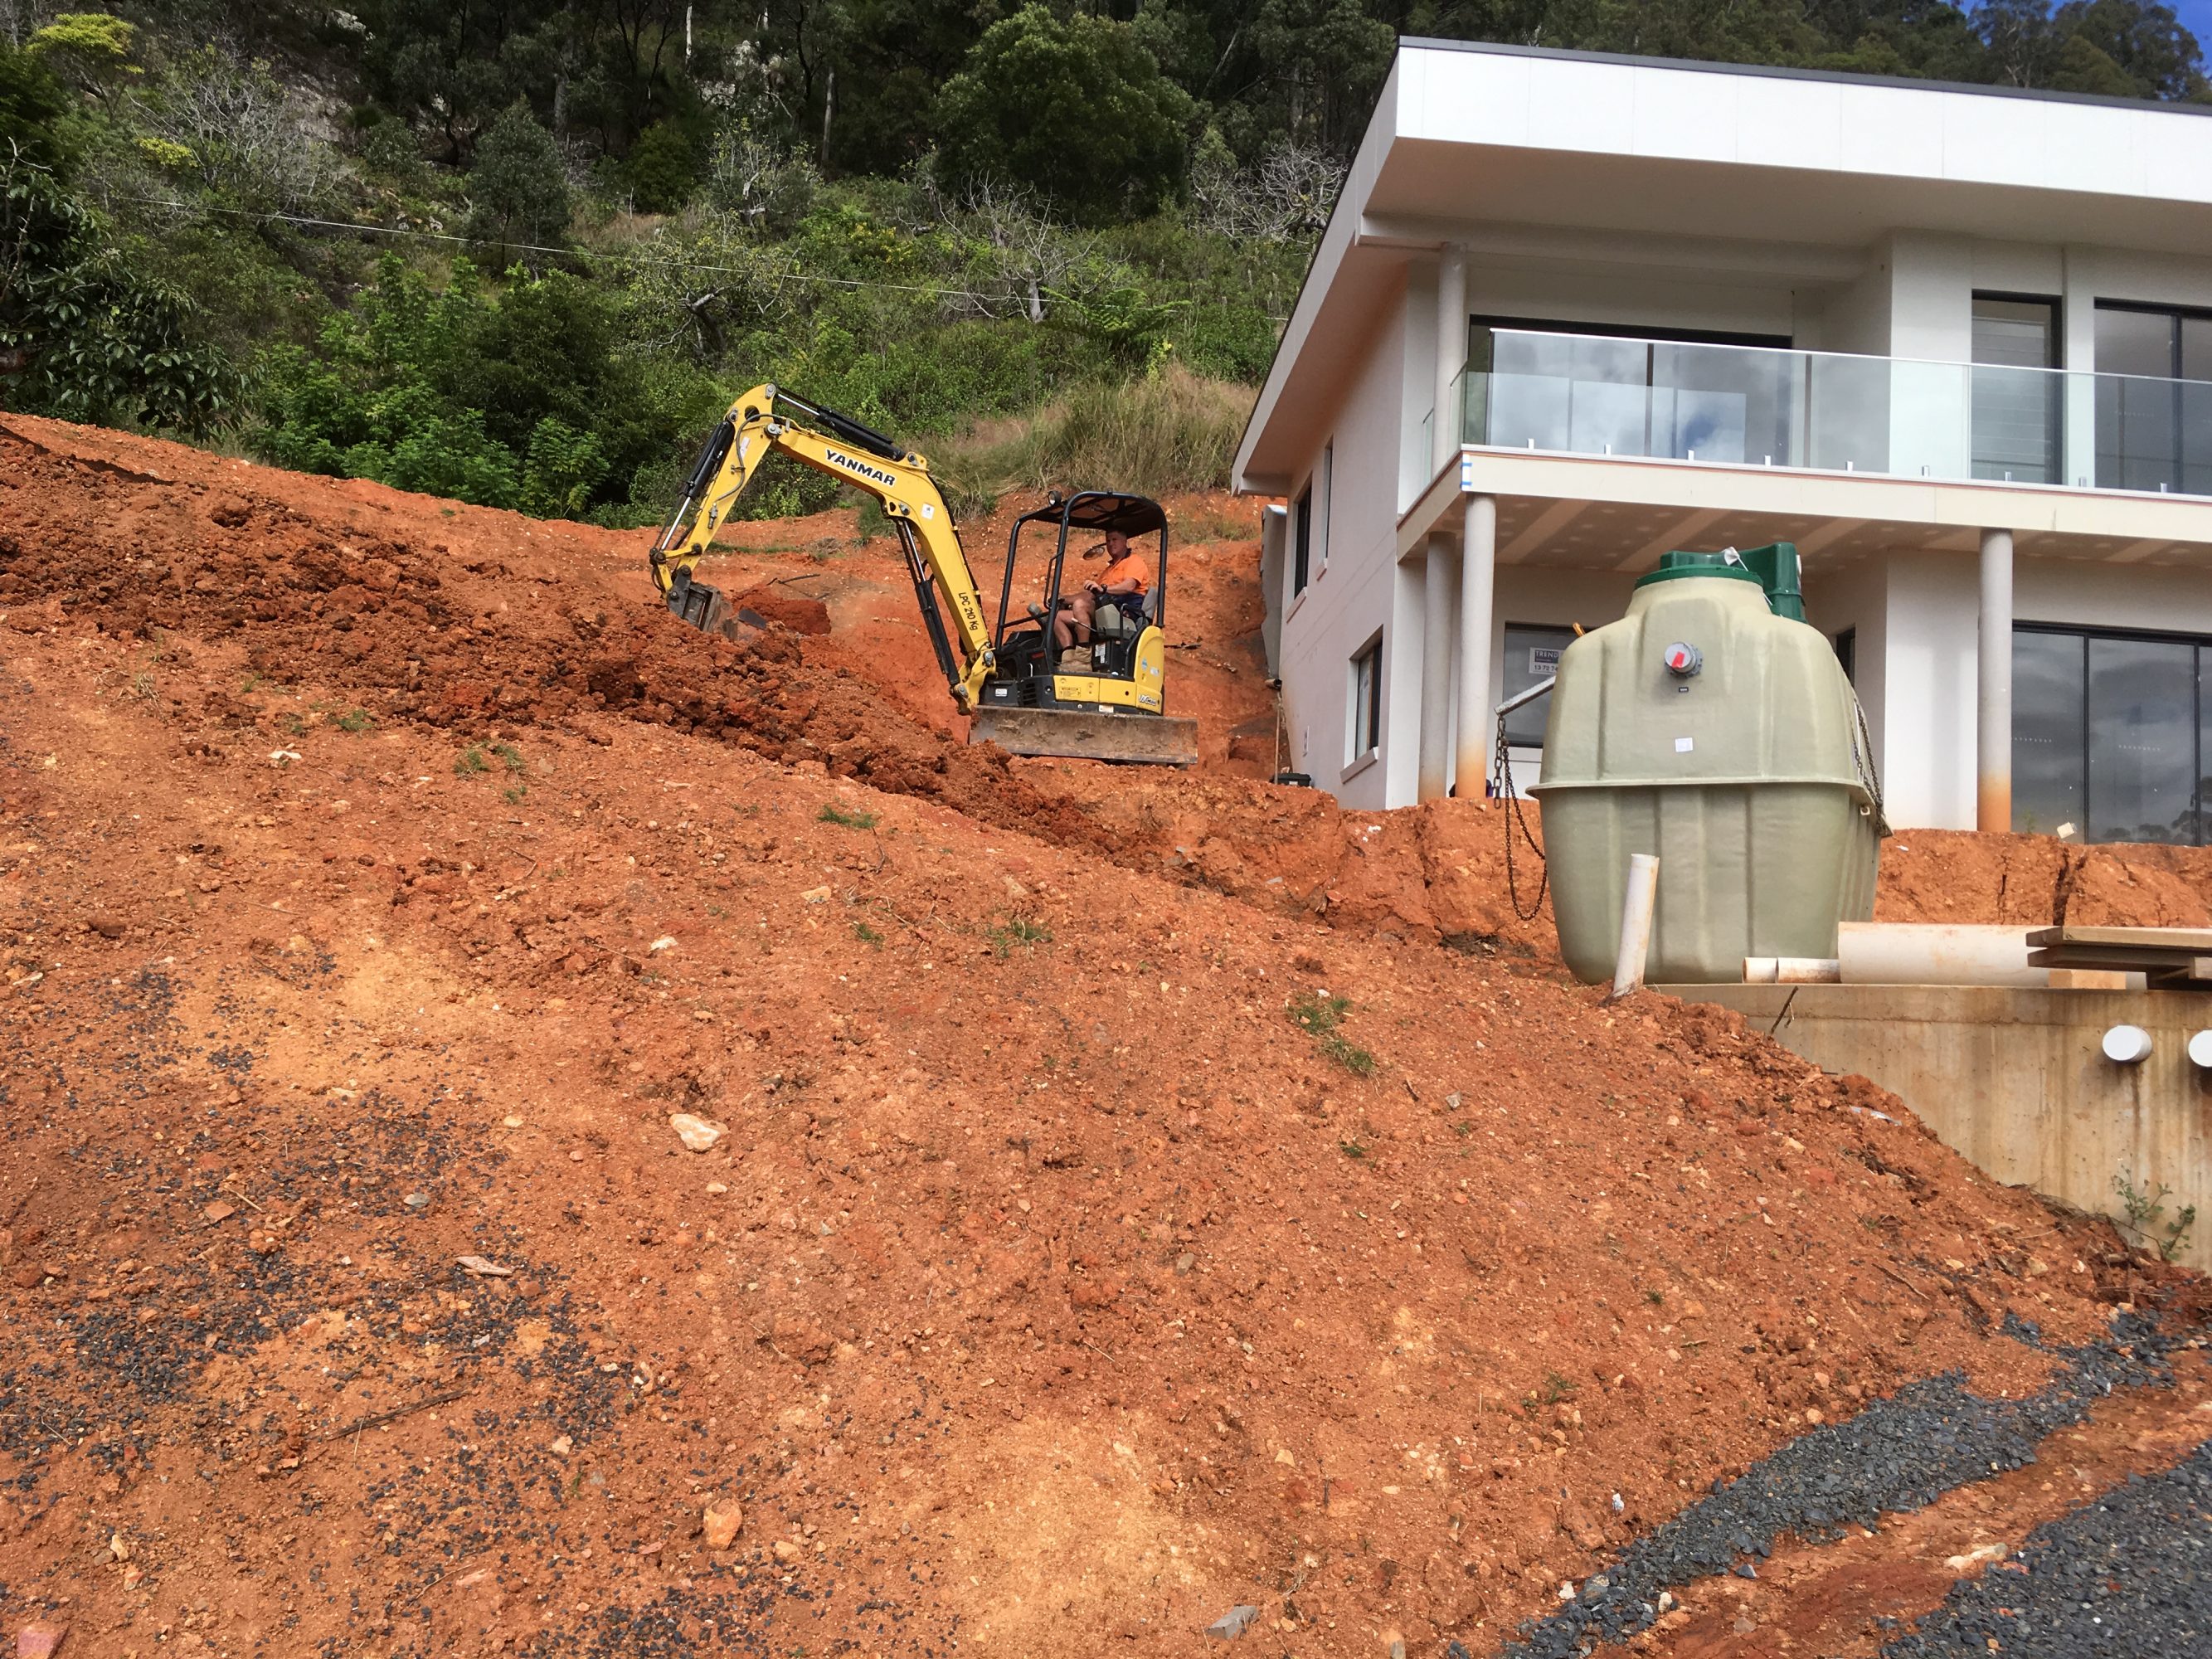 Installing a Fuji Clean home sewage treatment system in the Korora hills near Coffs Harbour is an exercise in precision.